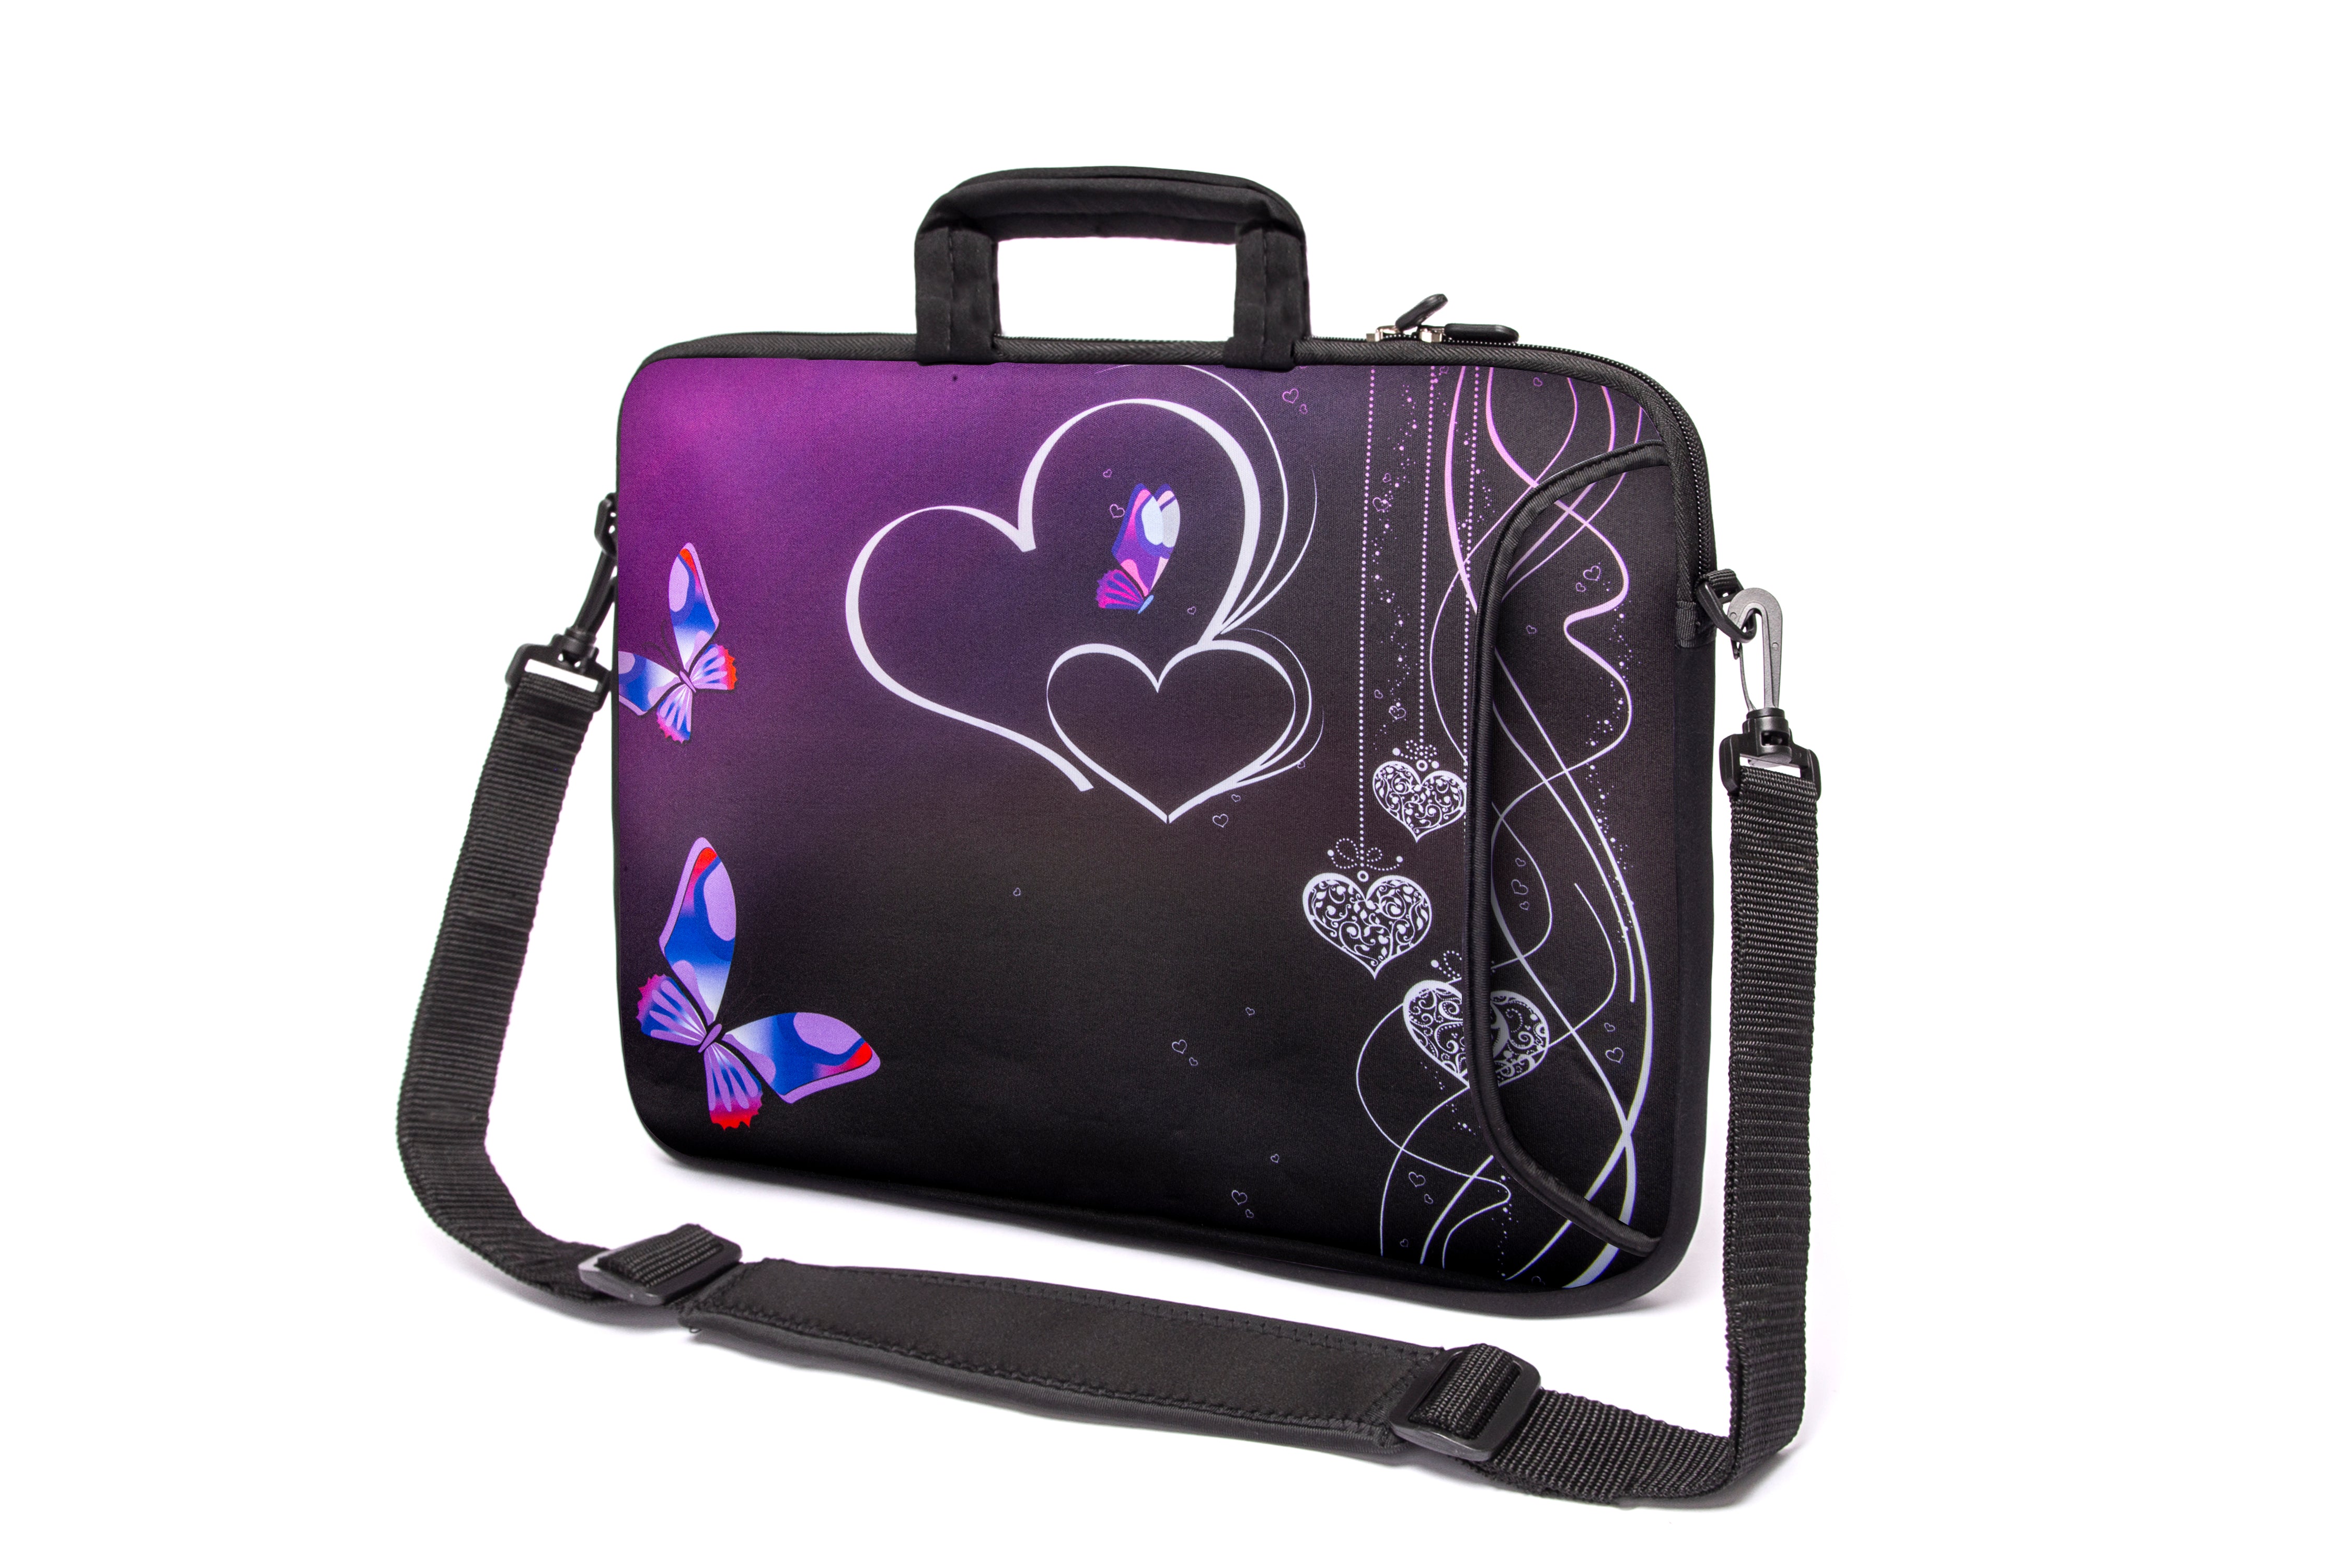 17"- 17.3" (inch) LAPTOP BAG/CASE WITH HANDLE & STRAP, NEOPRENE MADE FOR LAPTOPS/NOTEBOOKS, ZIPPED*PURPLE BUTTERFLIES 2*